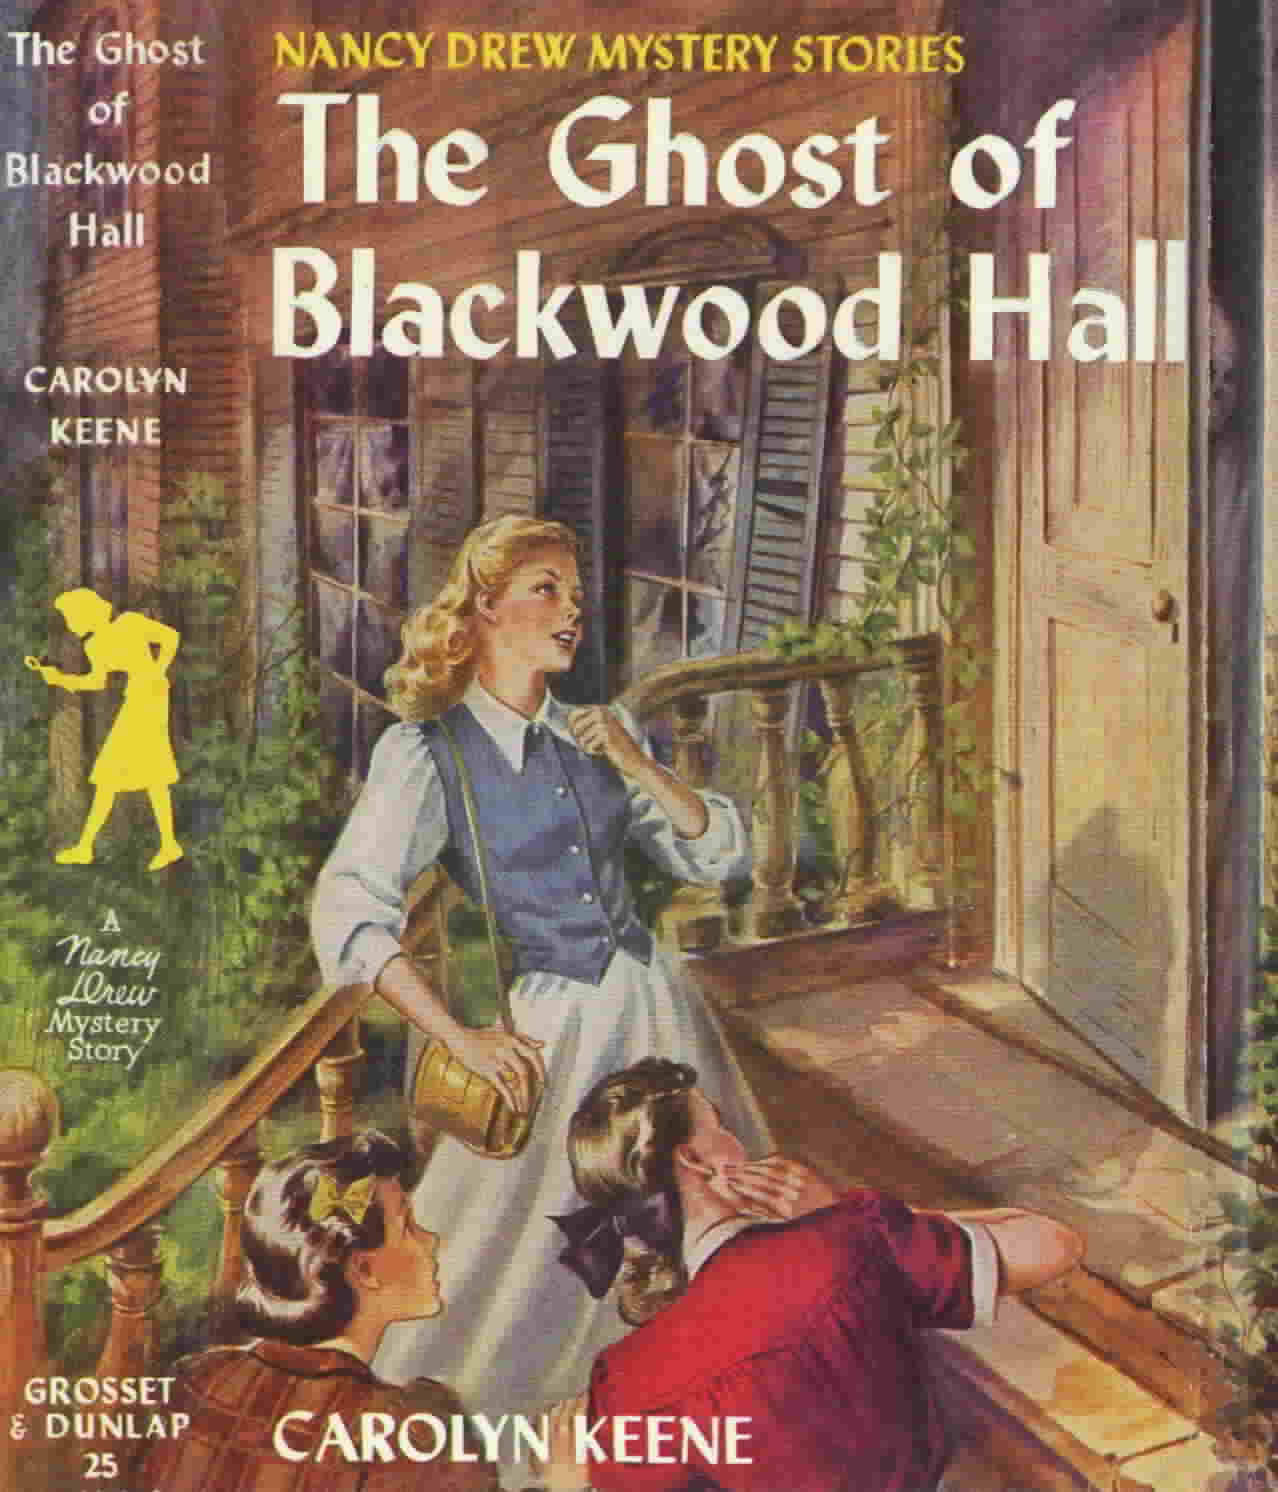 The Ghost of Blackwood Hall